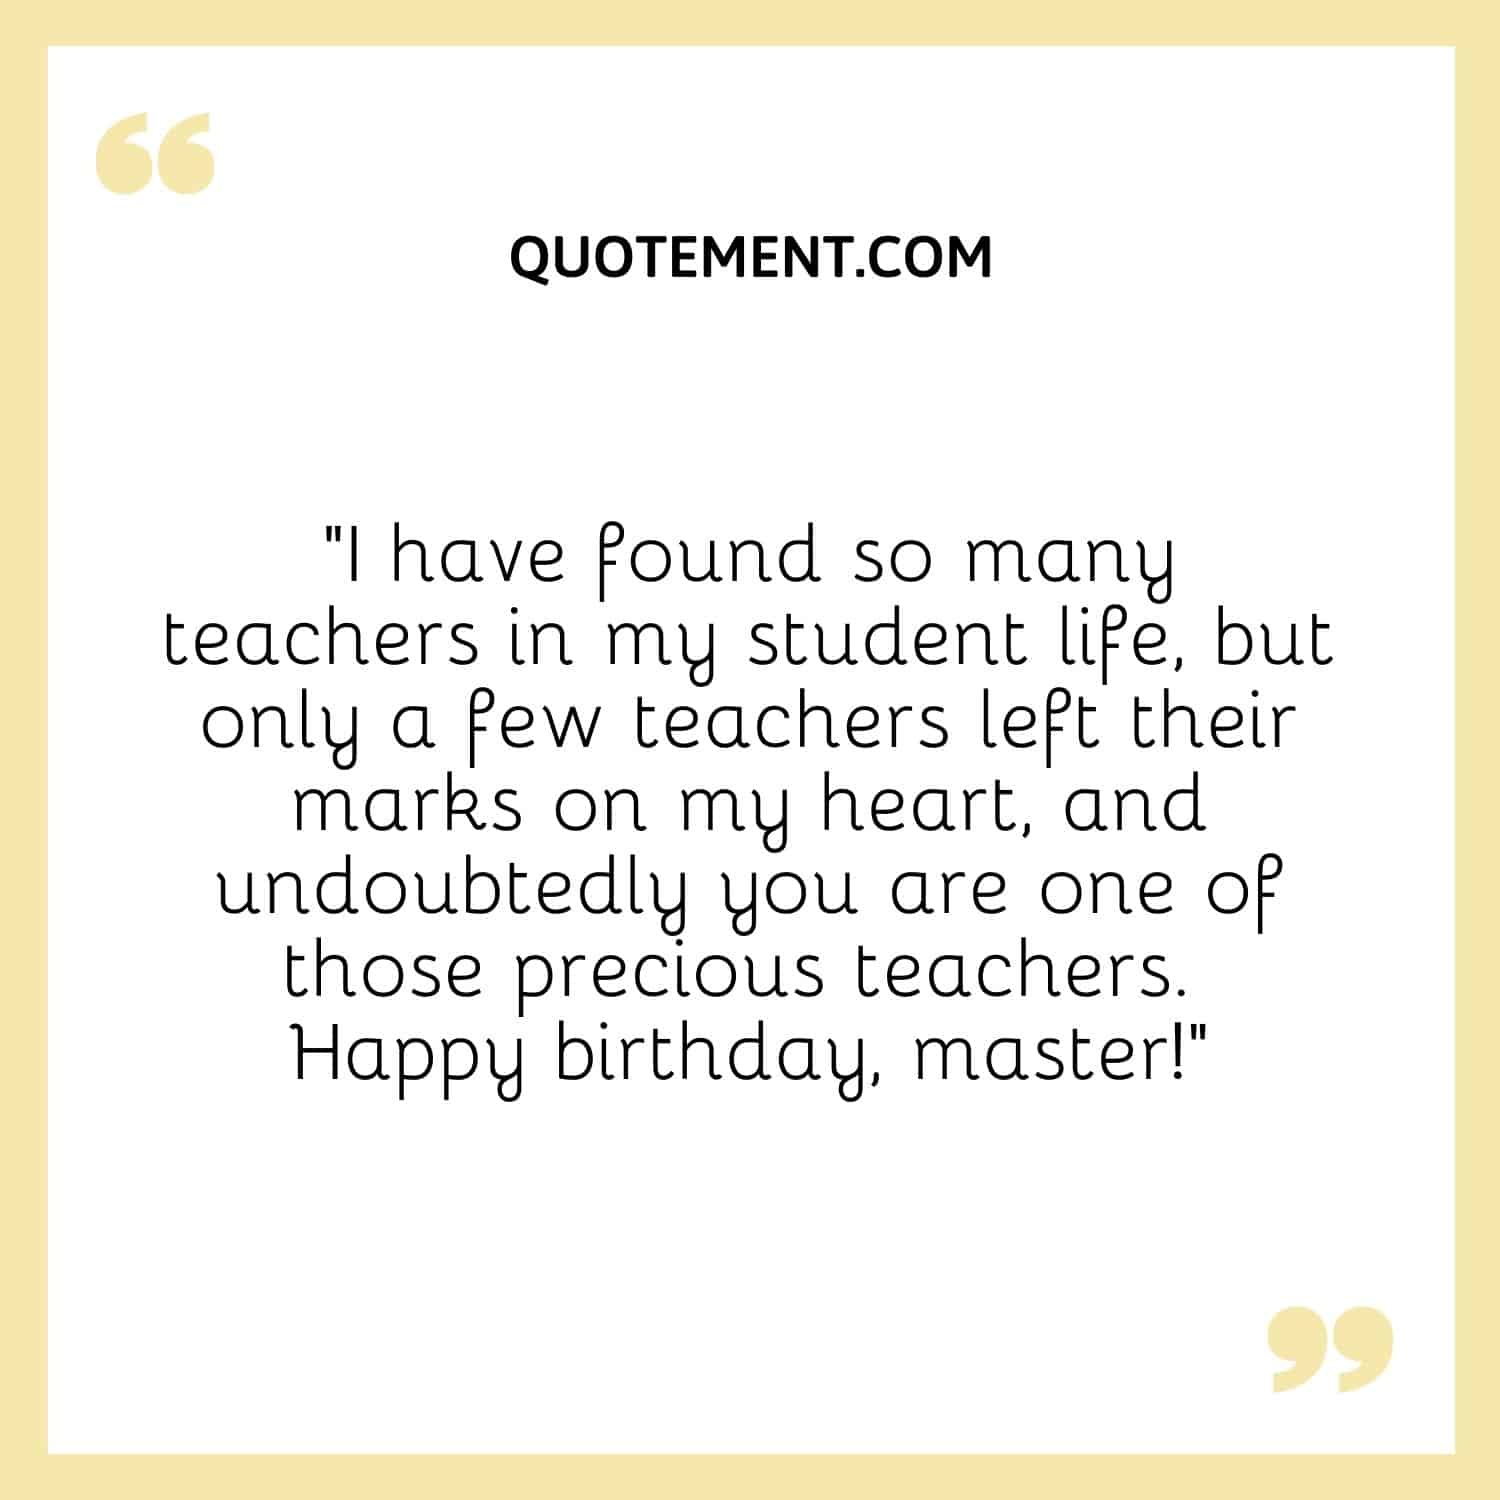 I have found so many teachers in my student life, but only a few teachers left their marks on my heart